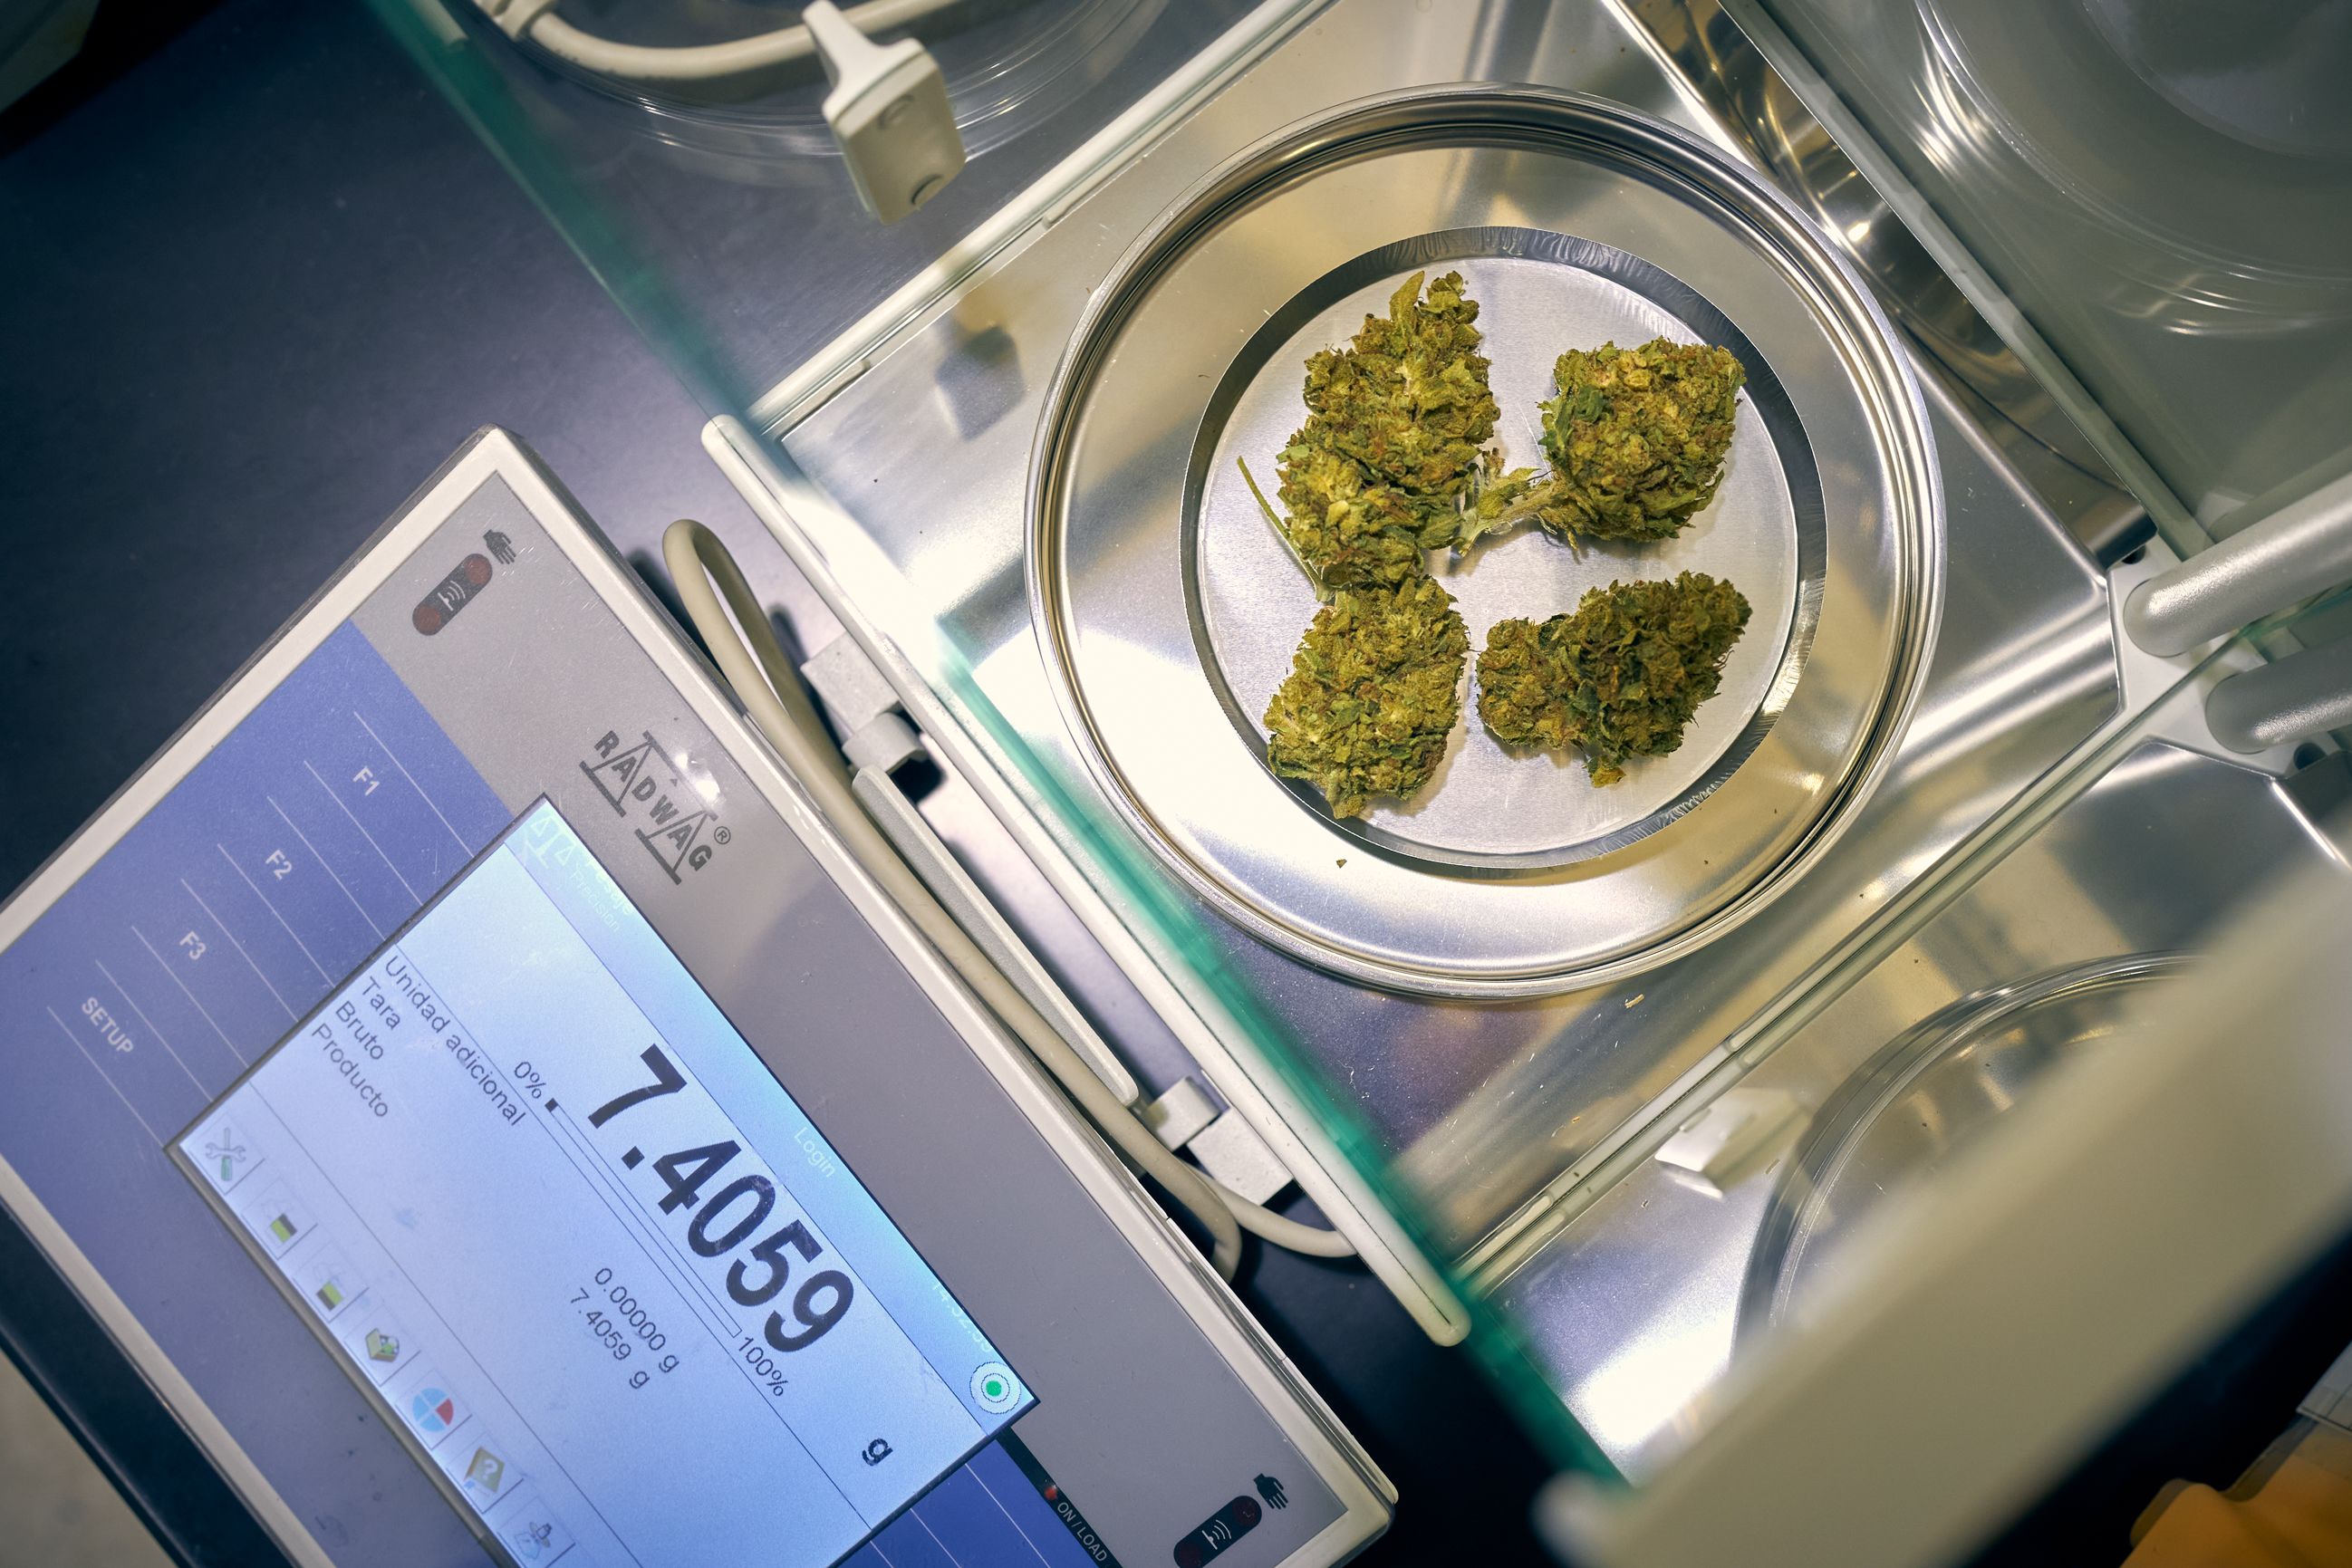 Top-down view of cannabis flowers being weighed on a scale in a lab